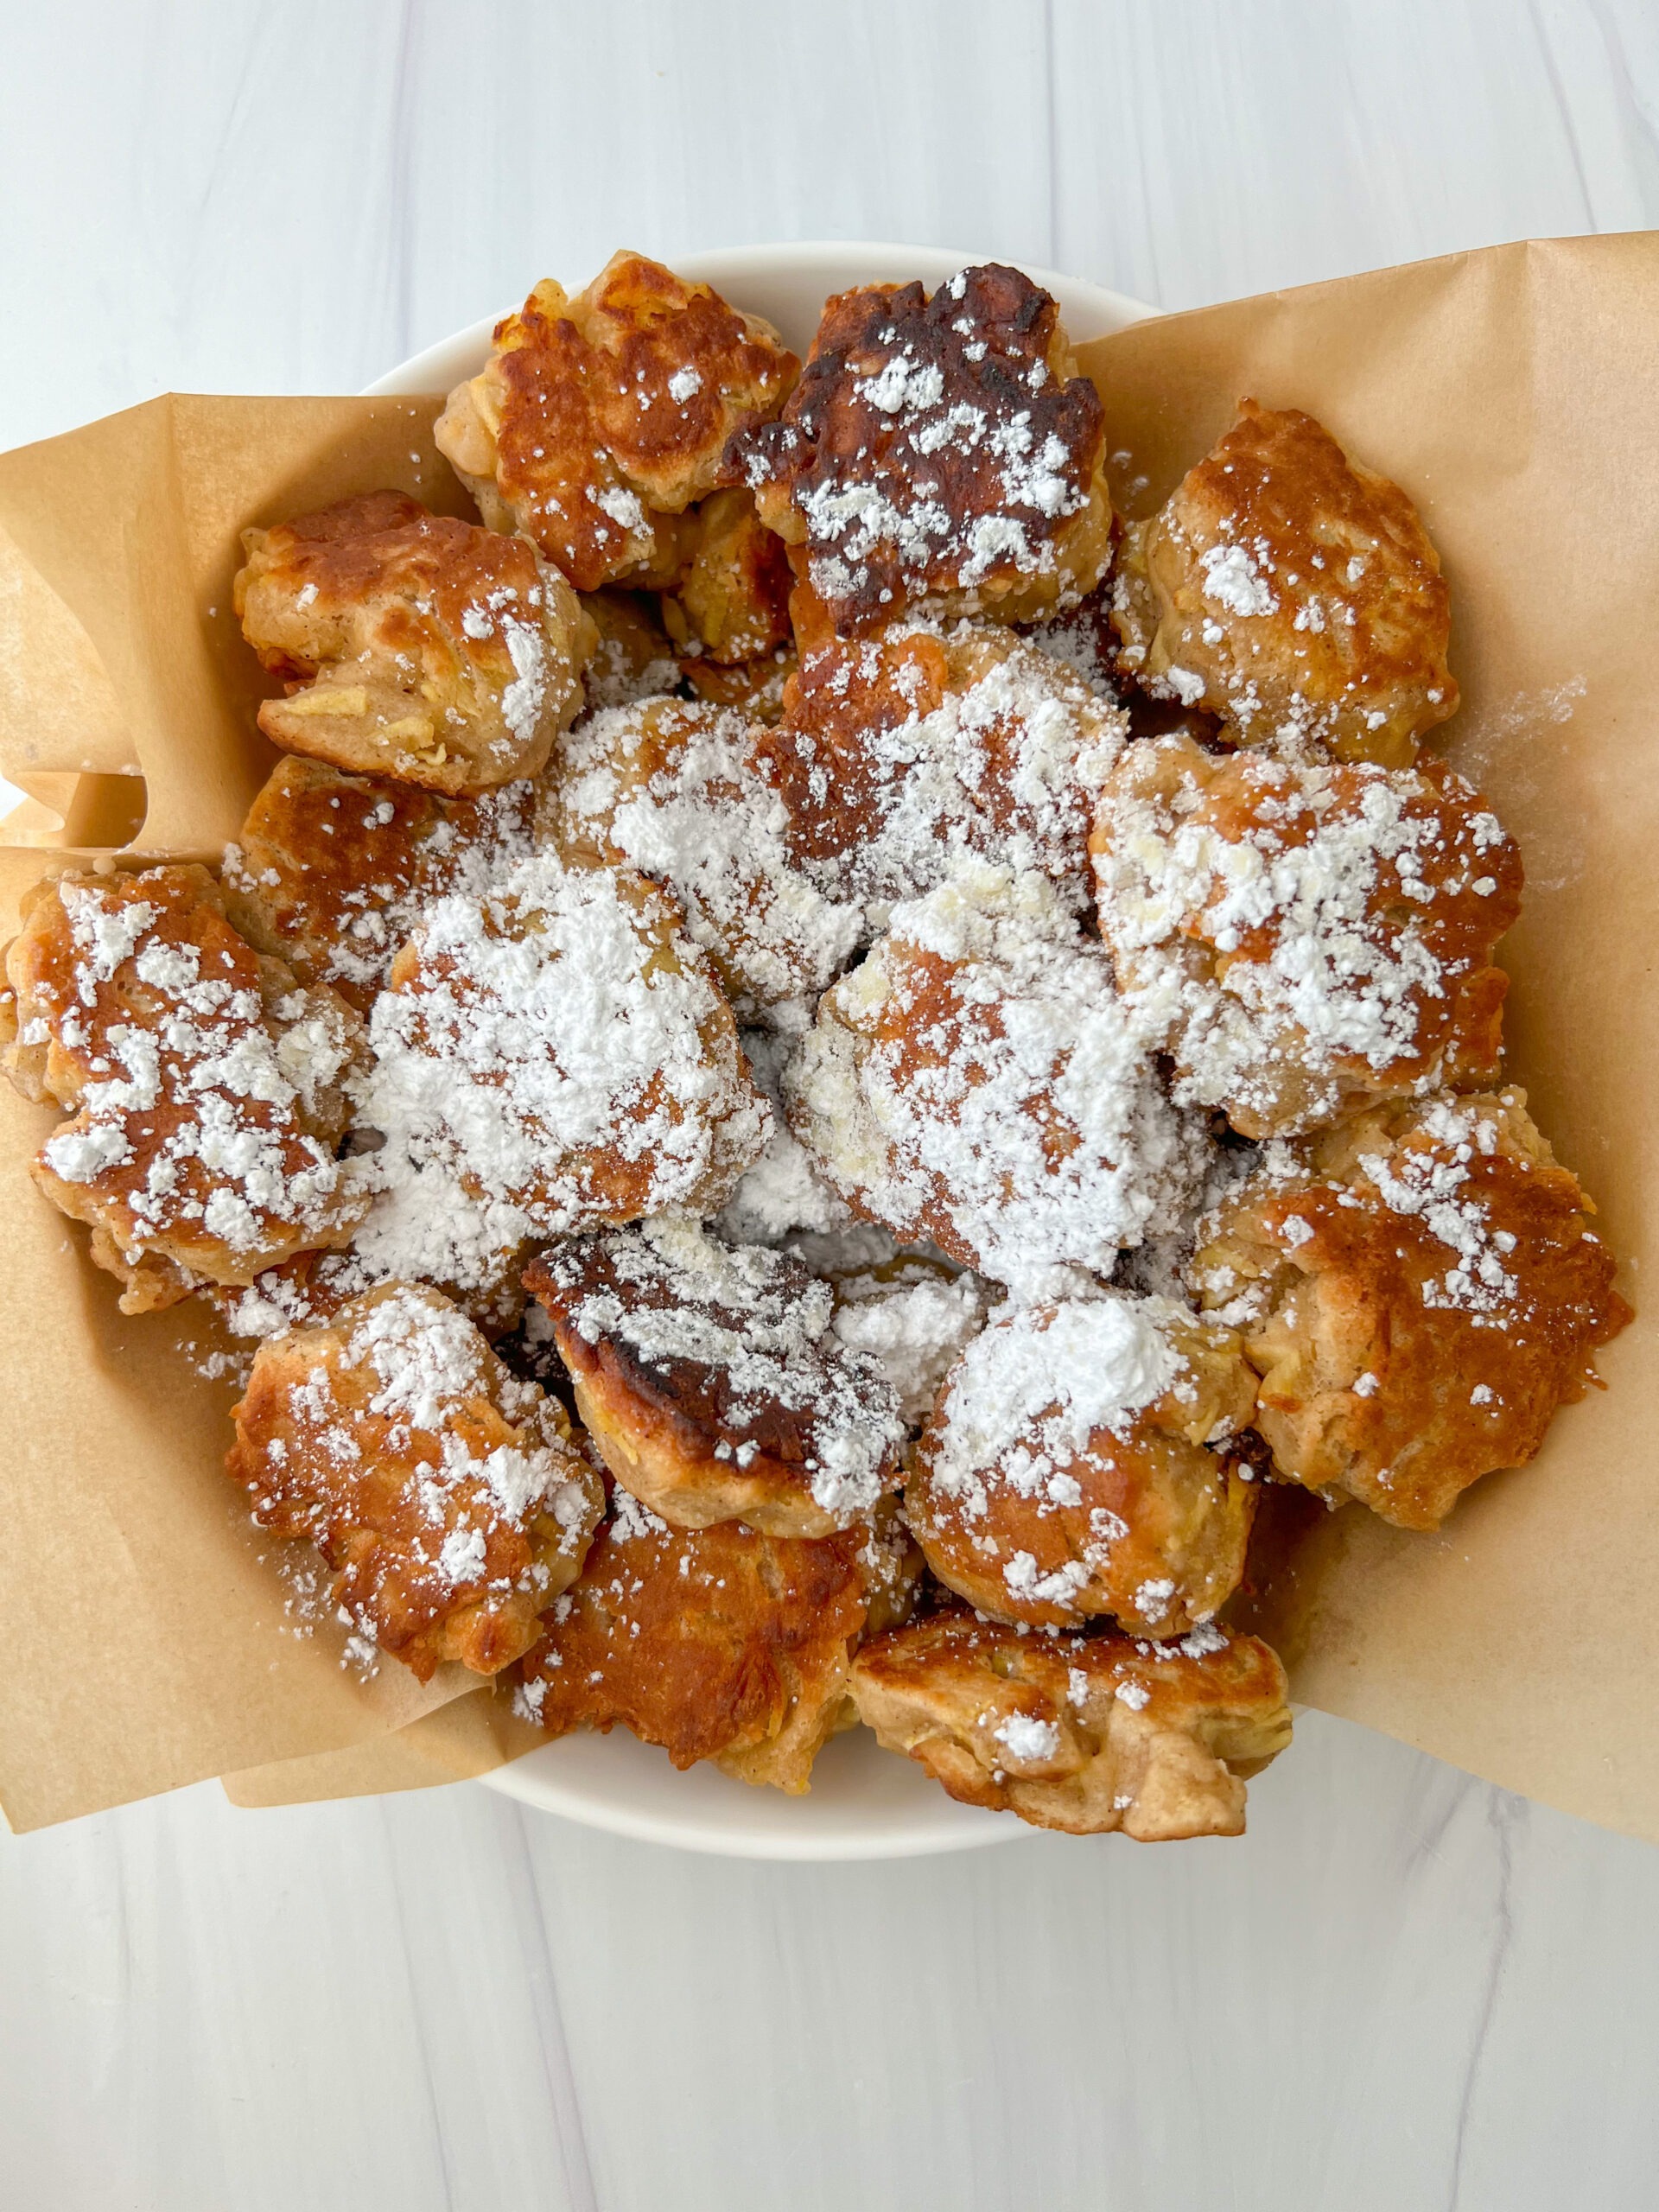 Apple fritters topped with powdered sugar.